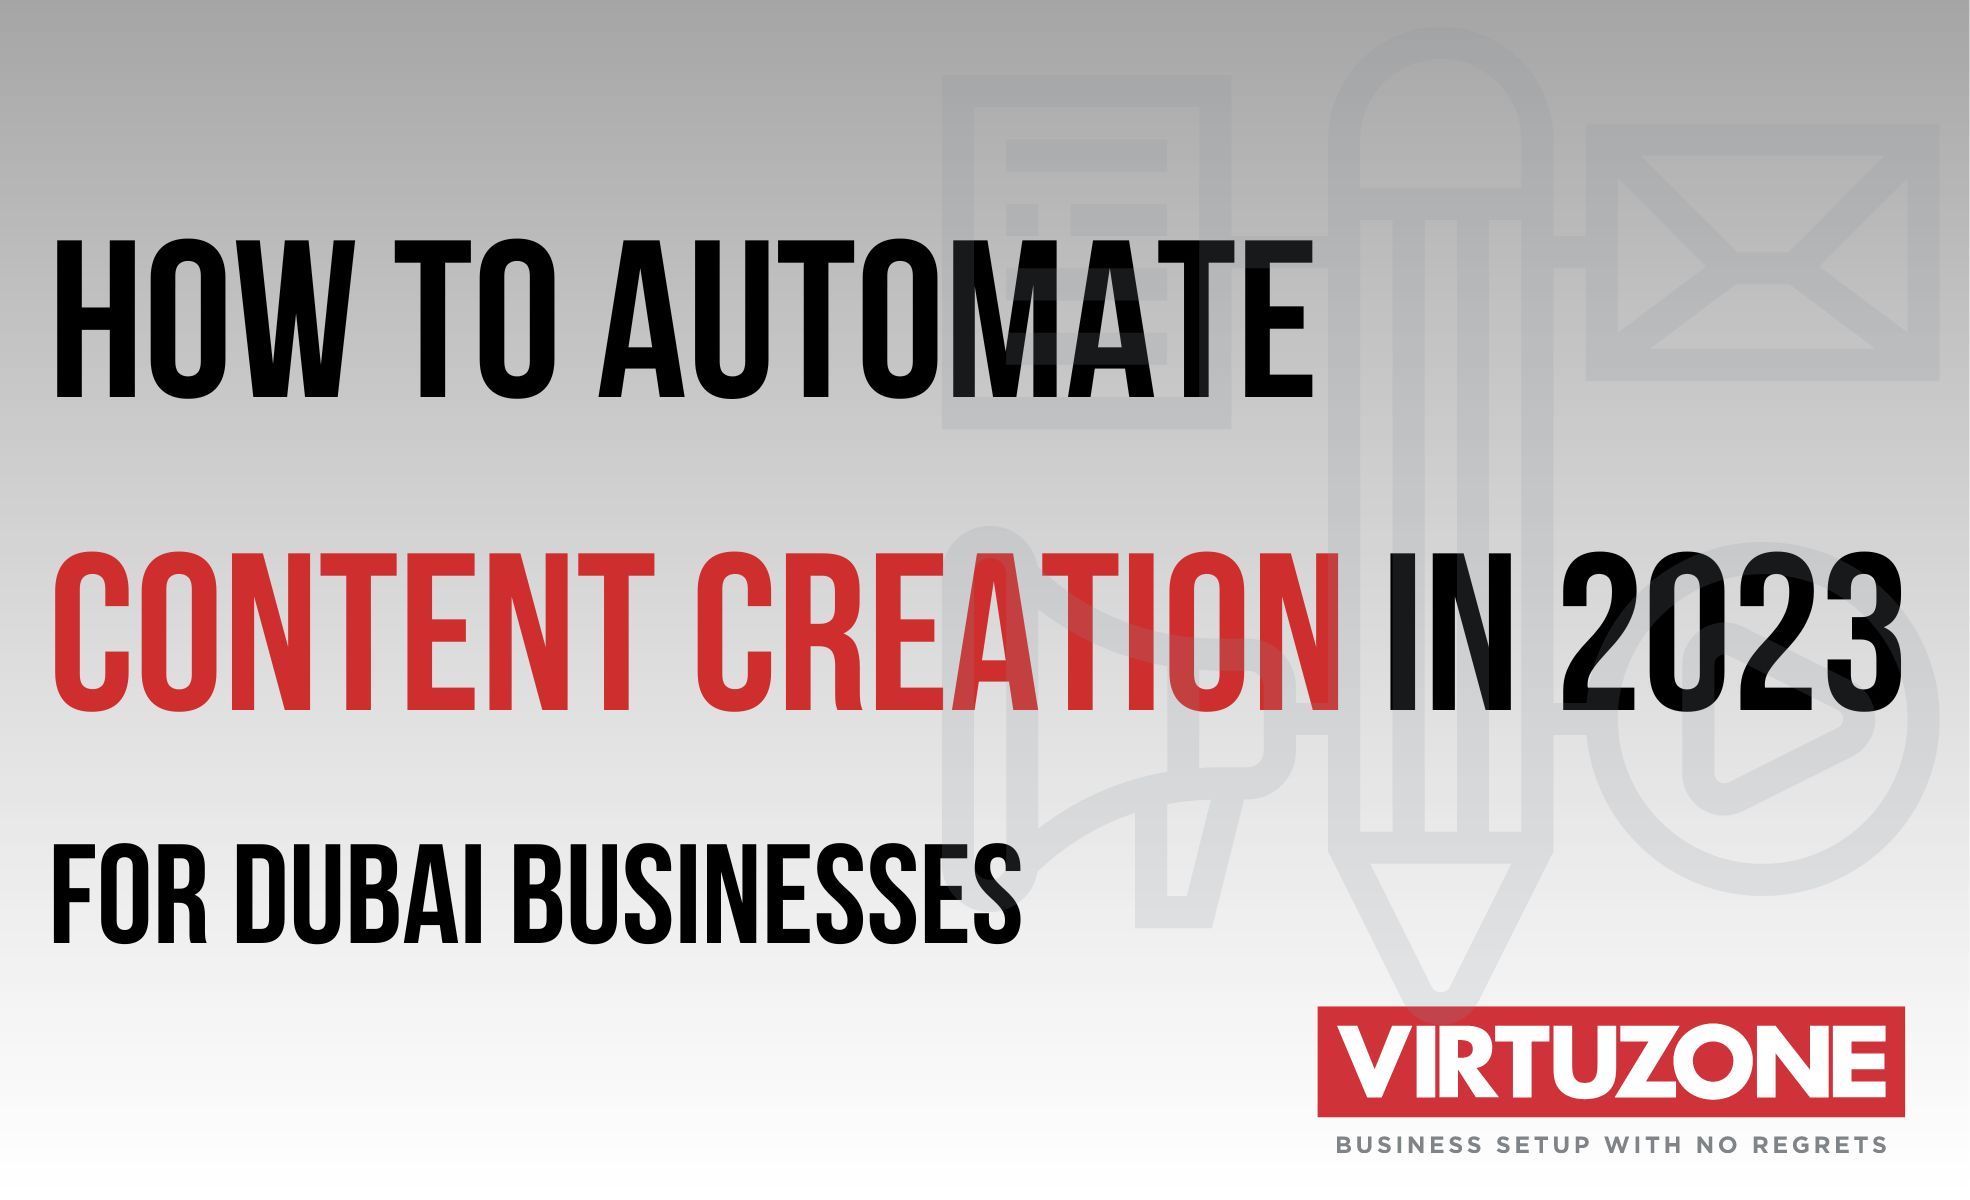 A cover photo saying "How to Automate Content Creation in 2023 for Dubai Businesses"